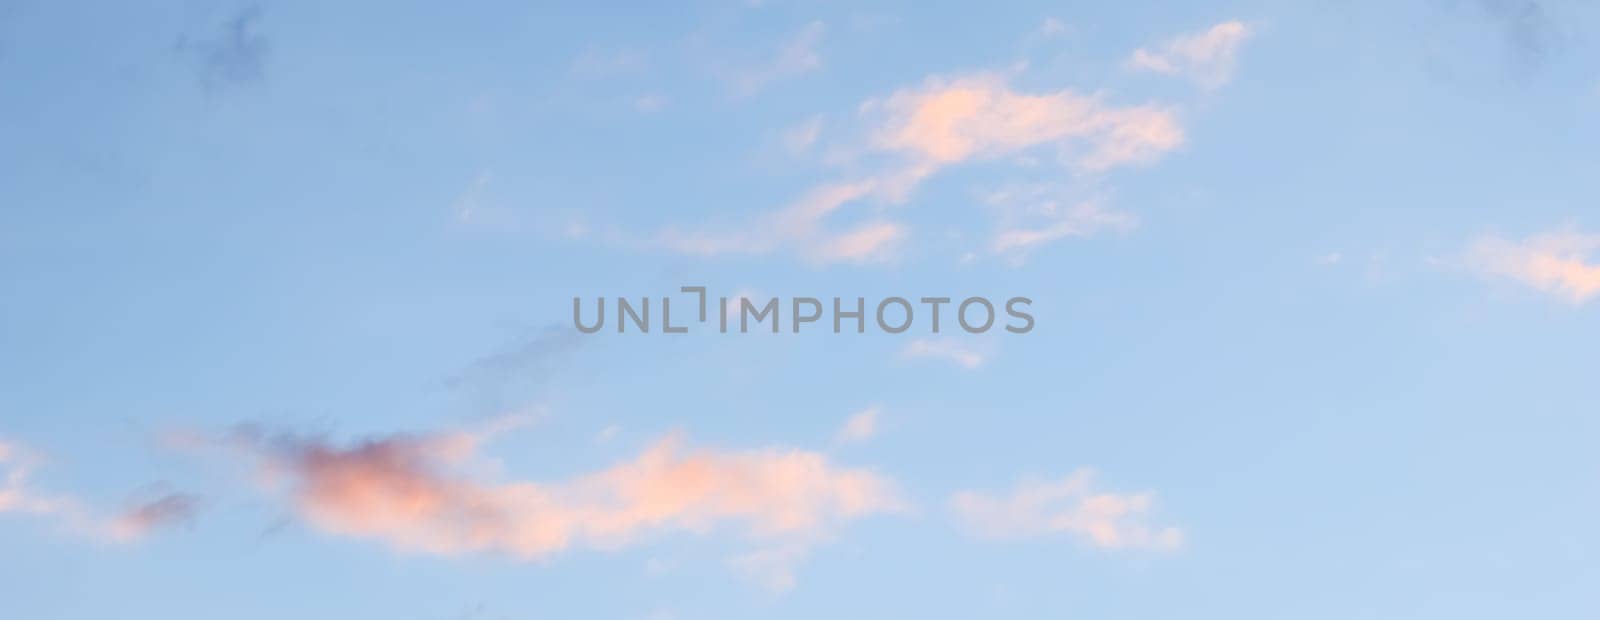 Blue sky background with pale pink clouds at sunset by Olayola